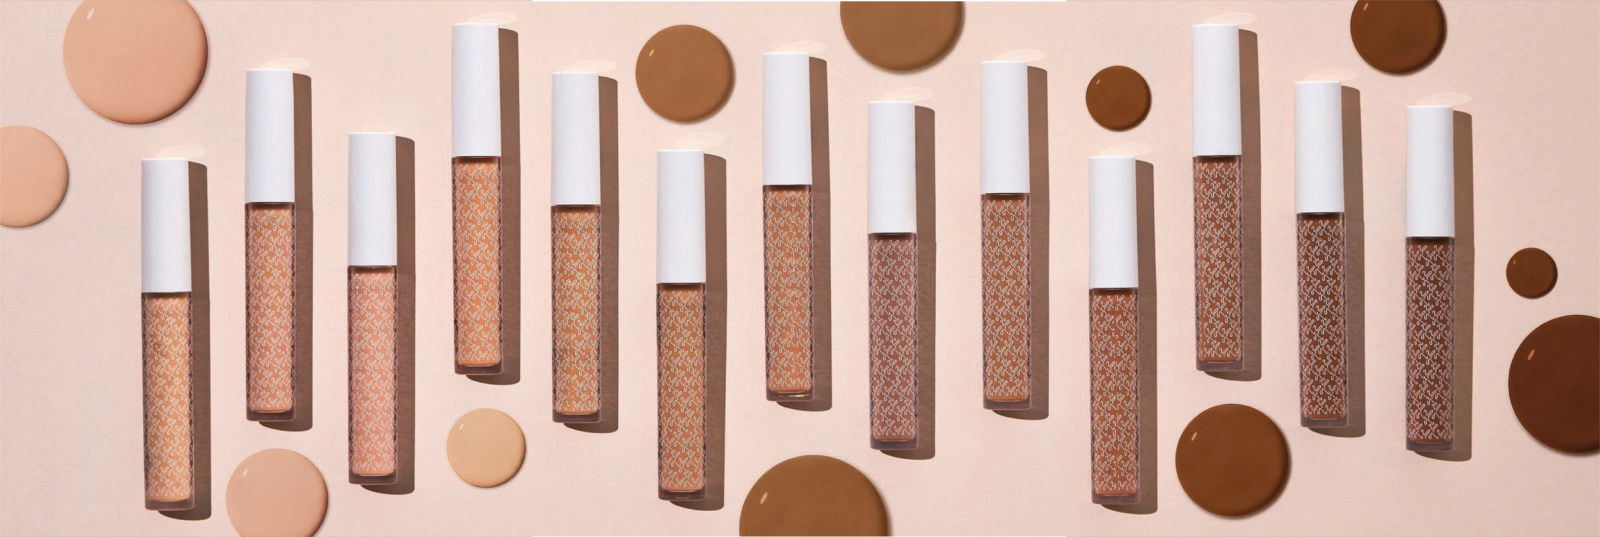 6 best concealers on the market that you should be buying!